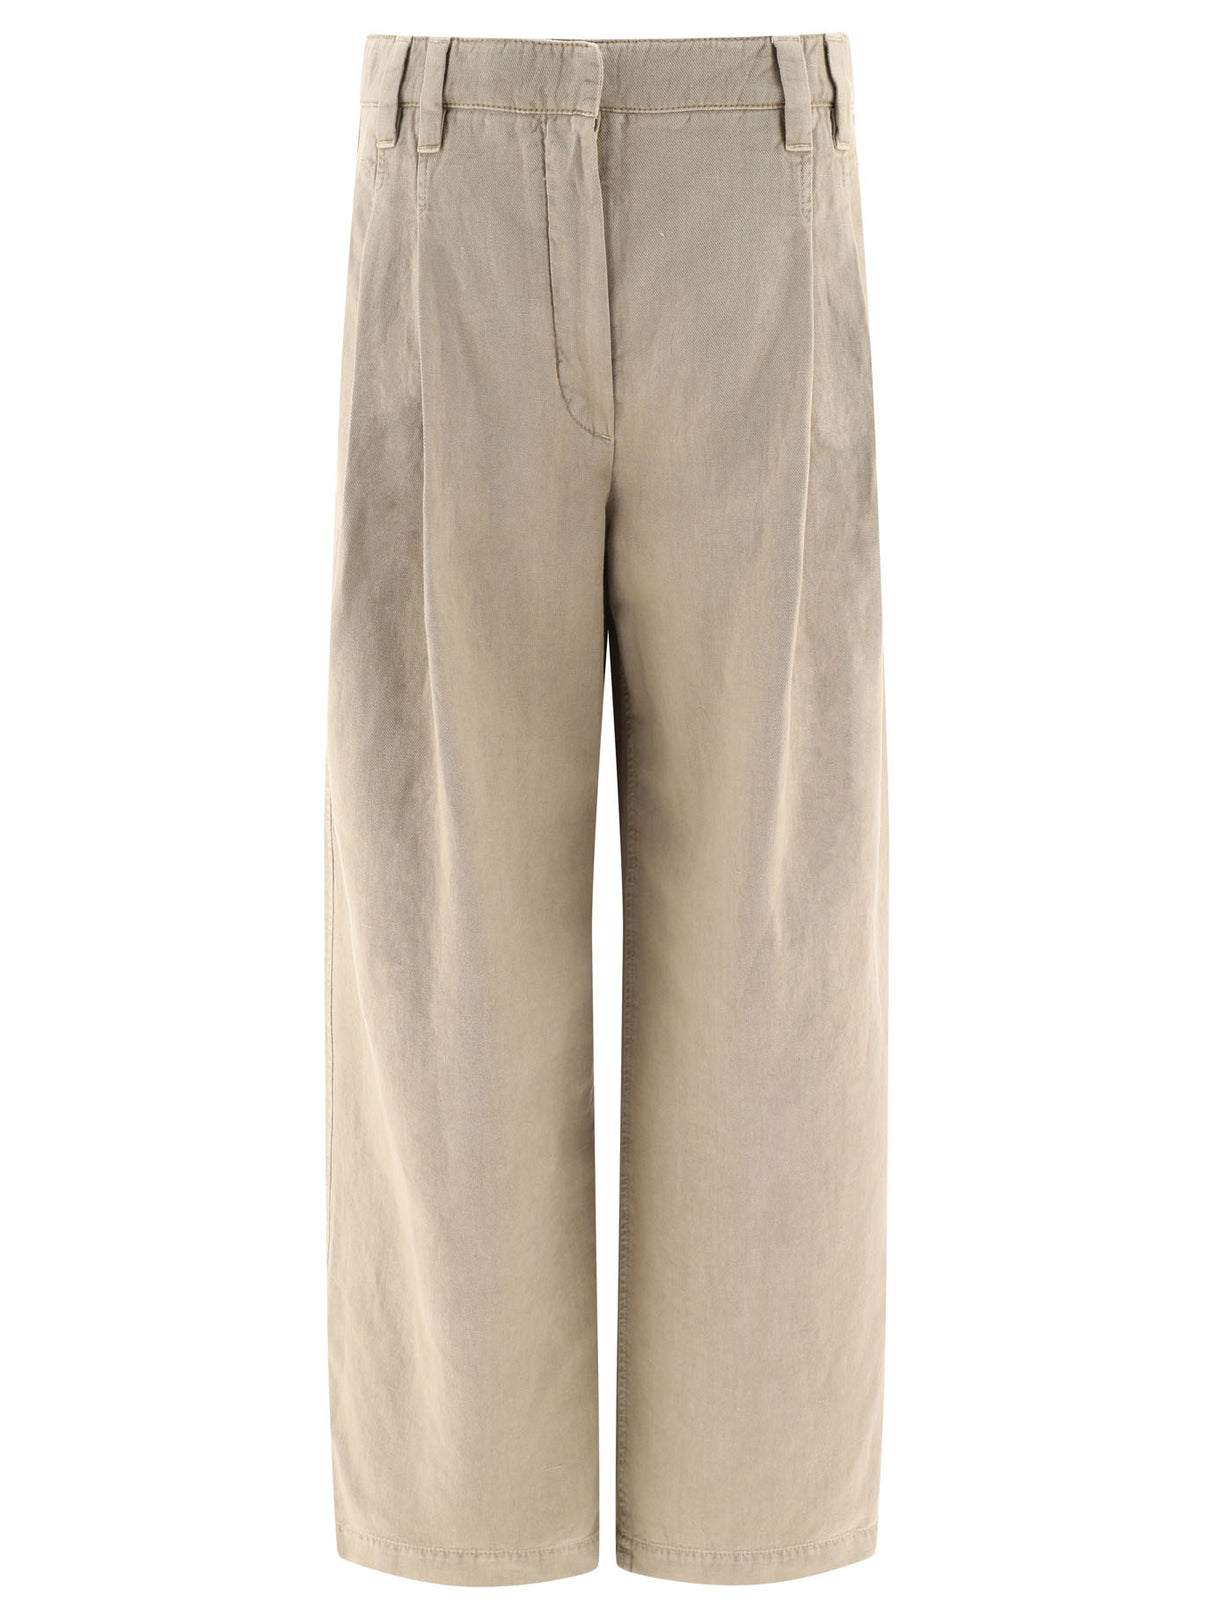 BRUNELLO CUCINELLI Beige Wide Leg Trousers for Women - Relaxed Fit for SS23